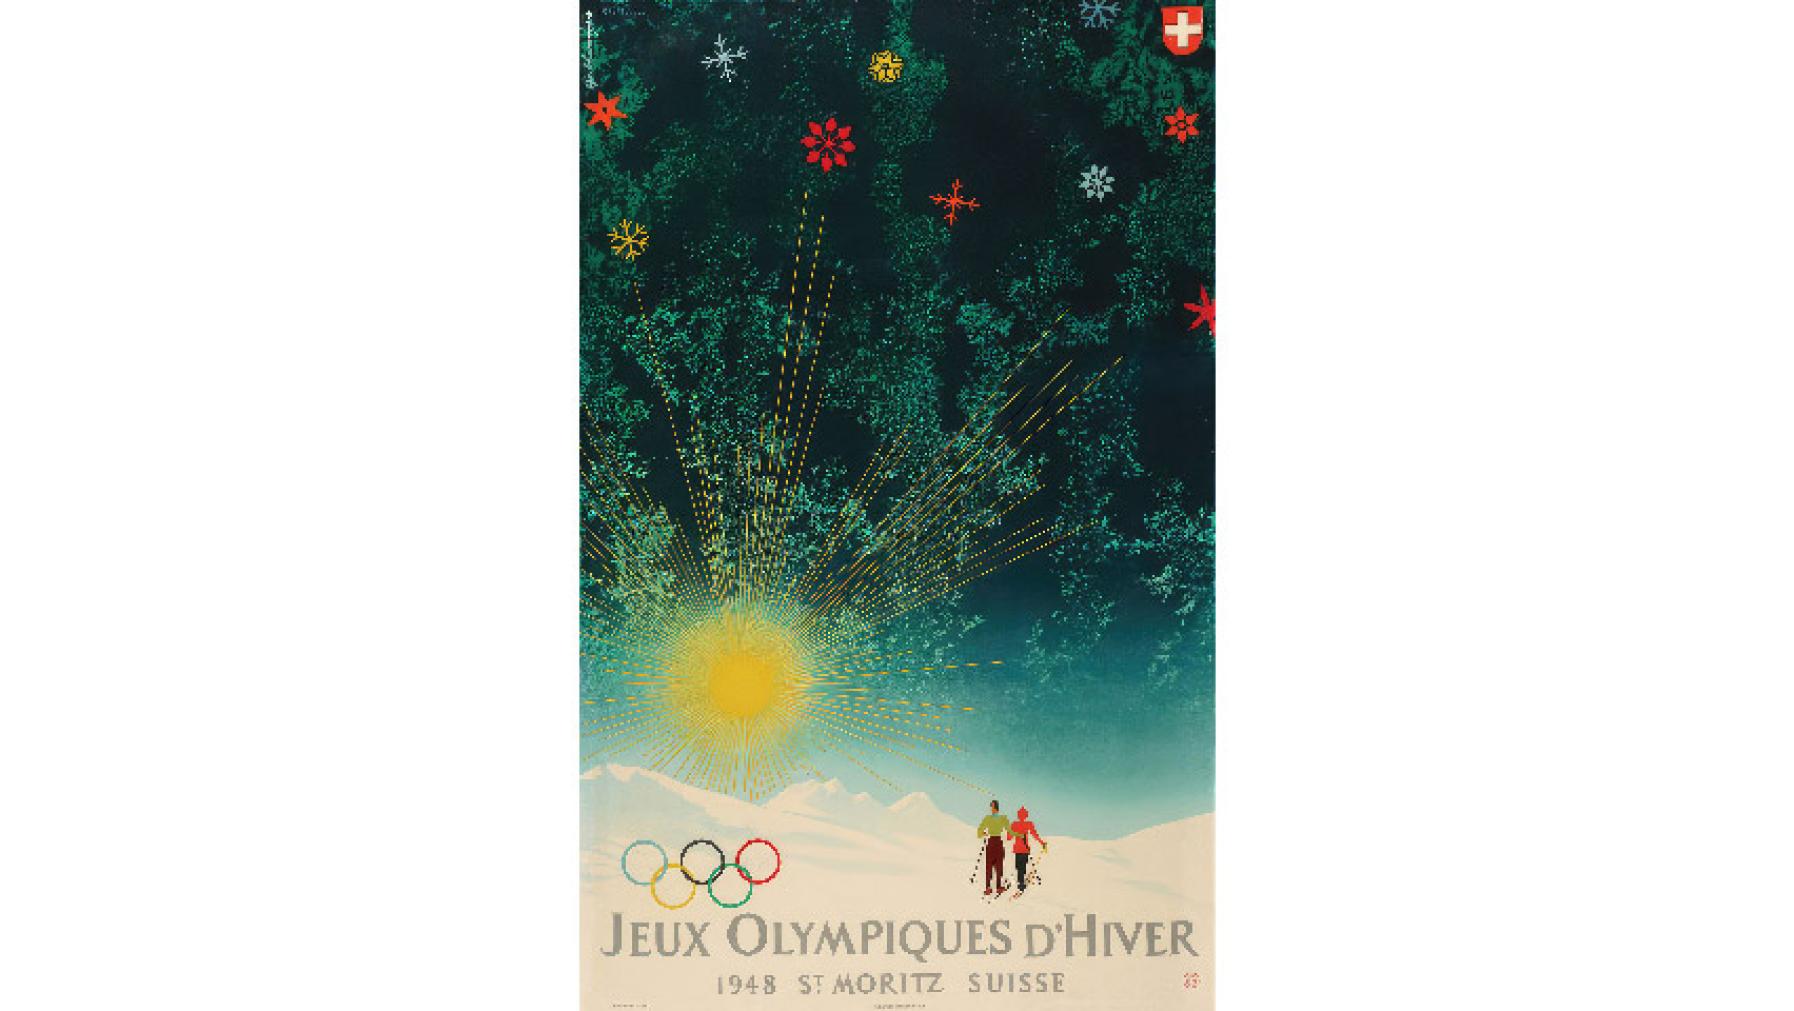 The poster for the 1948 Winter Games.